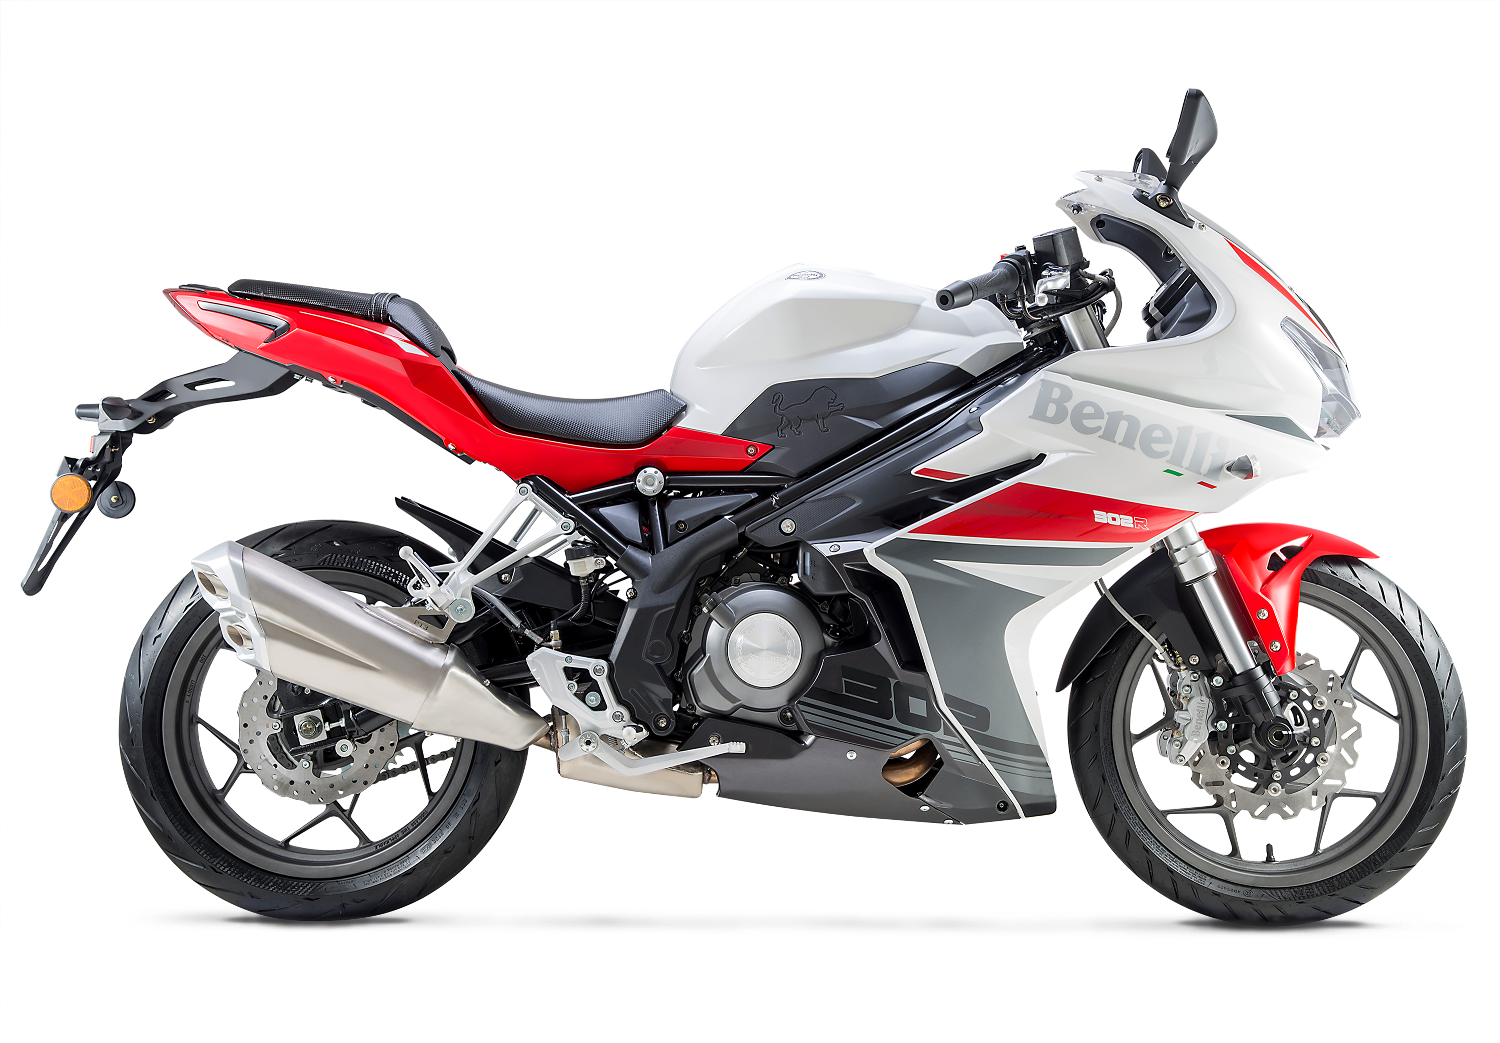 Mforce Bike Holdings Becomes Official Benelli's Motorcycles Distributor ...